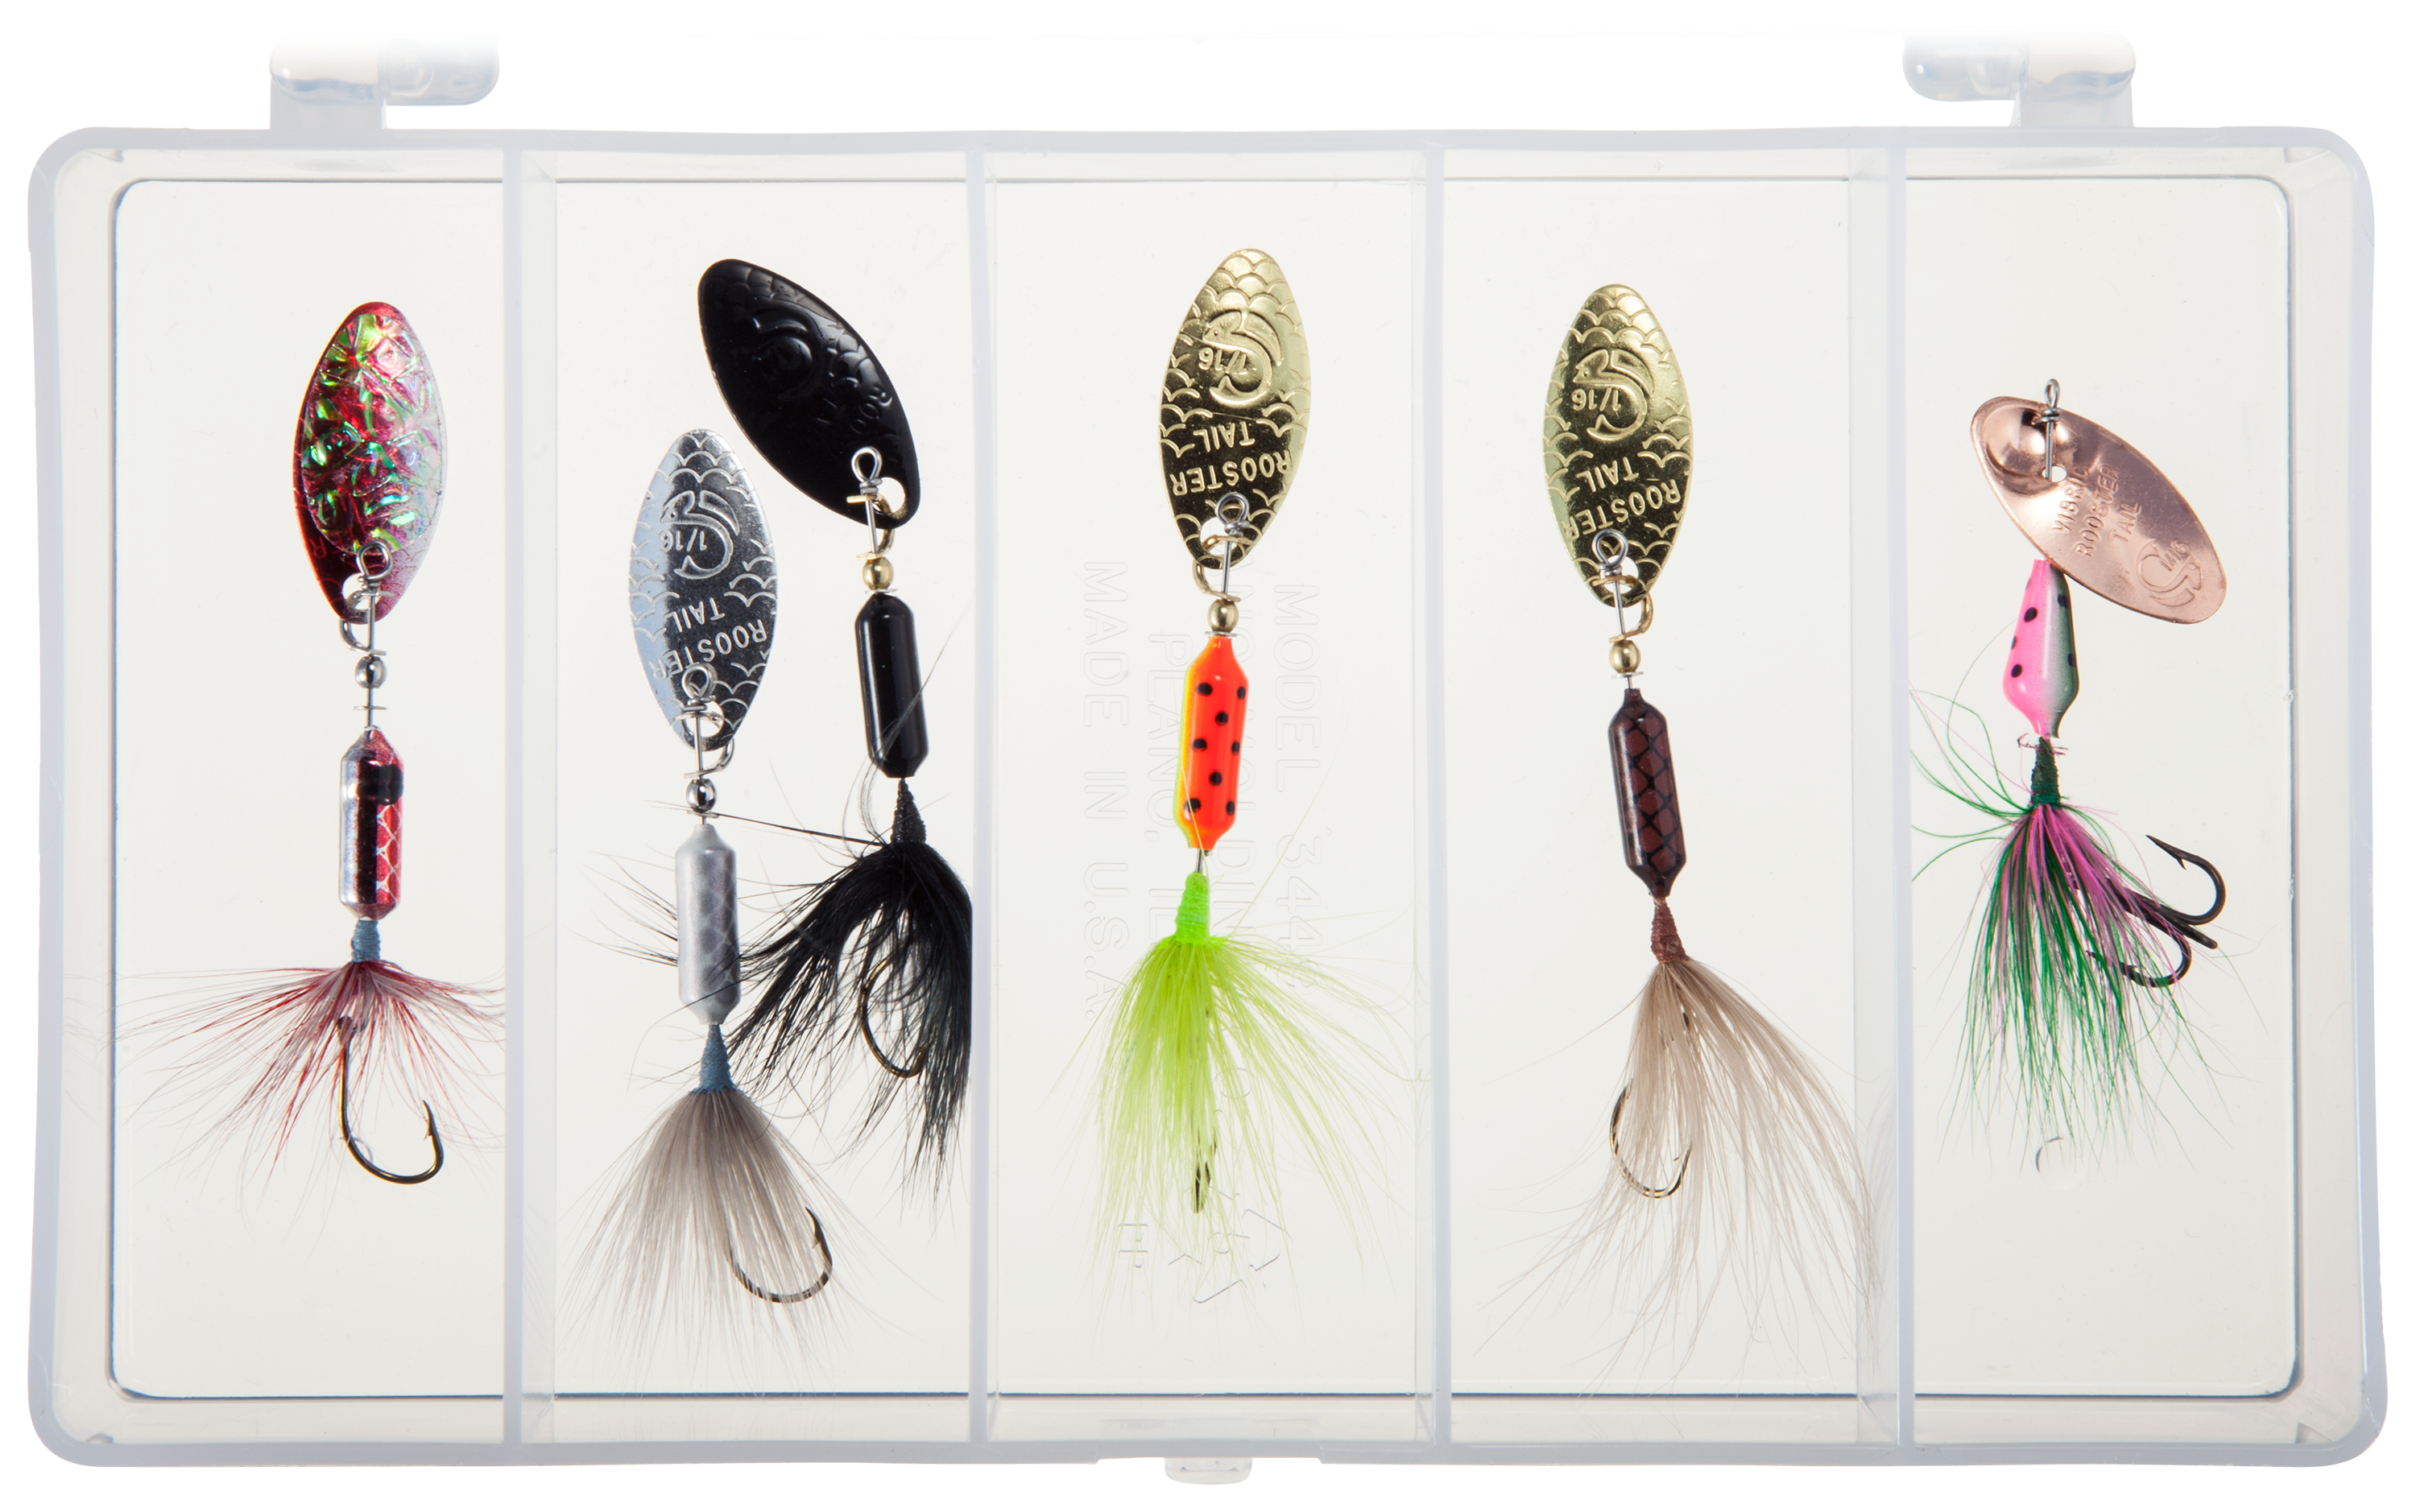  VMSIXVM Trout Lures Trout Spinners, Rooster Tail Trout Fishing  Lures For Bass Salmon Pike, Fishing Spinner Kit Smallmouth Bass Lures